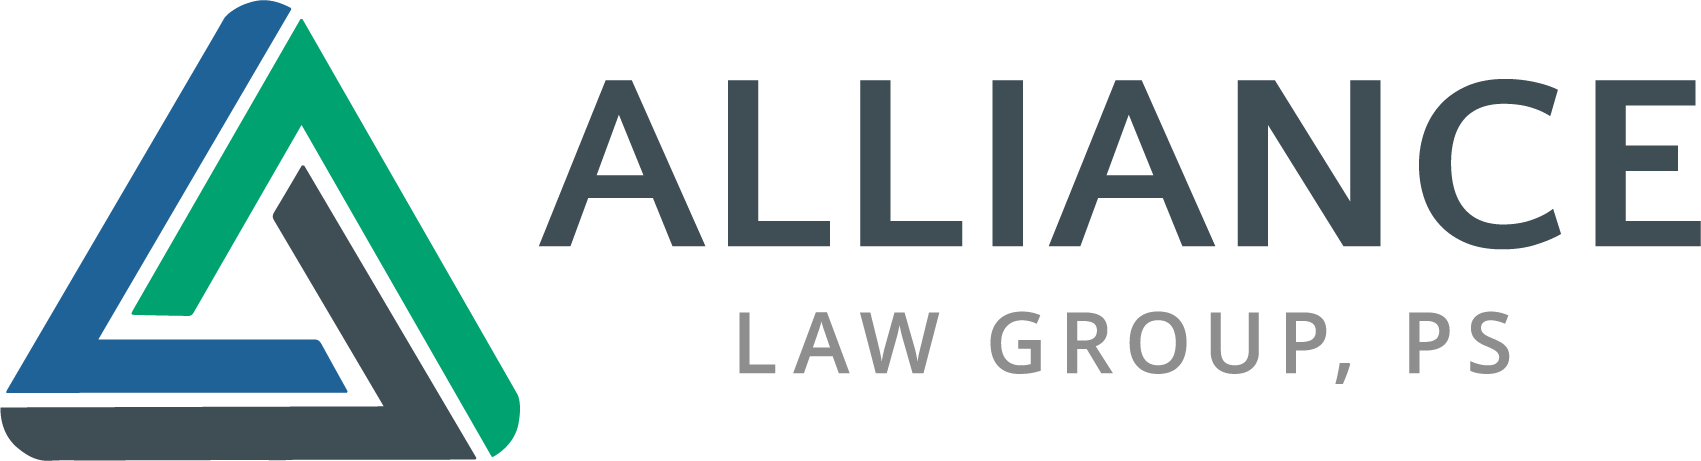 Alliance Law Group, PS